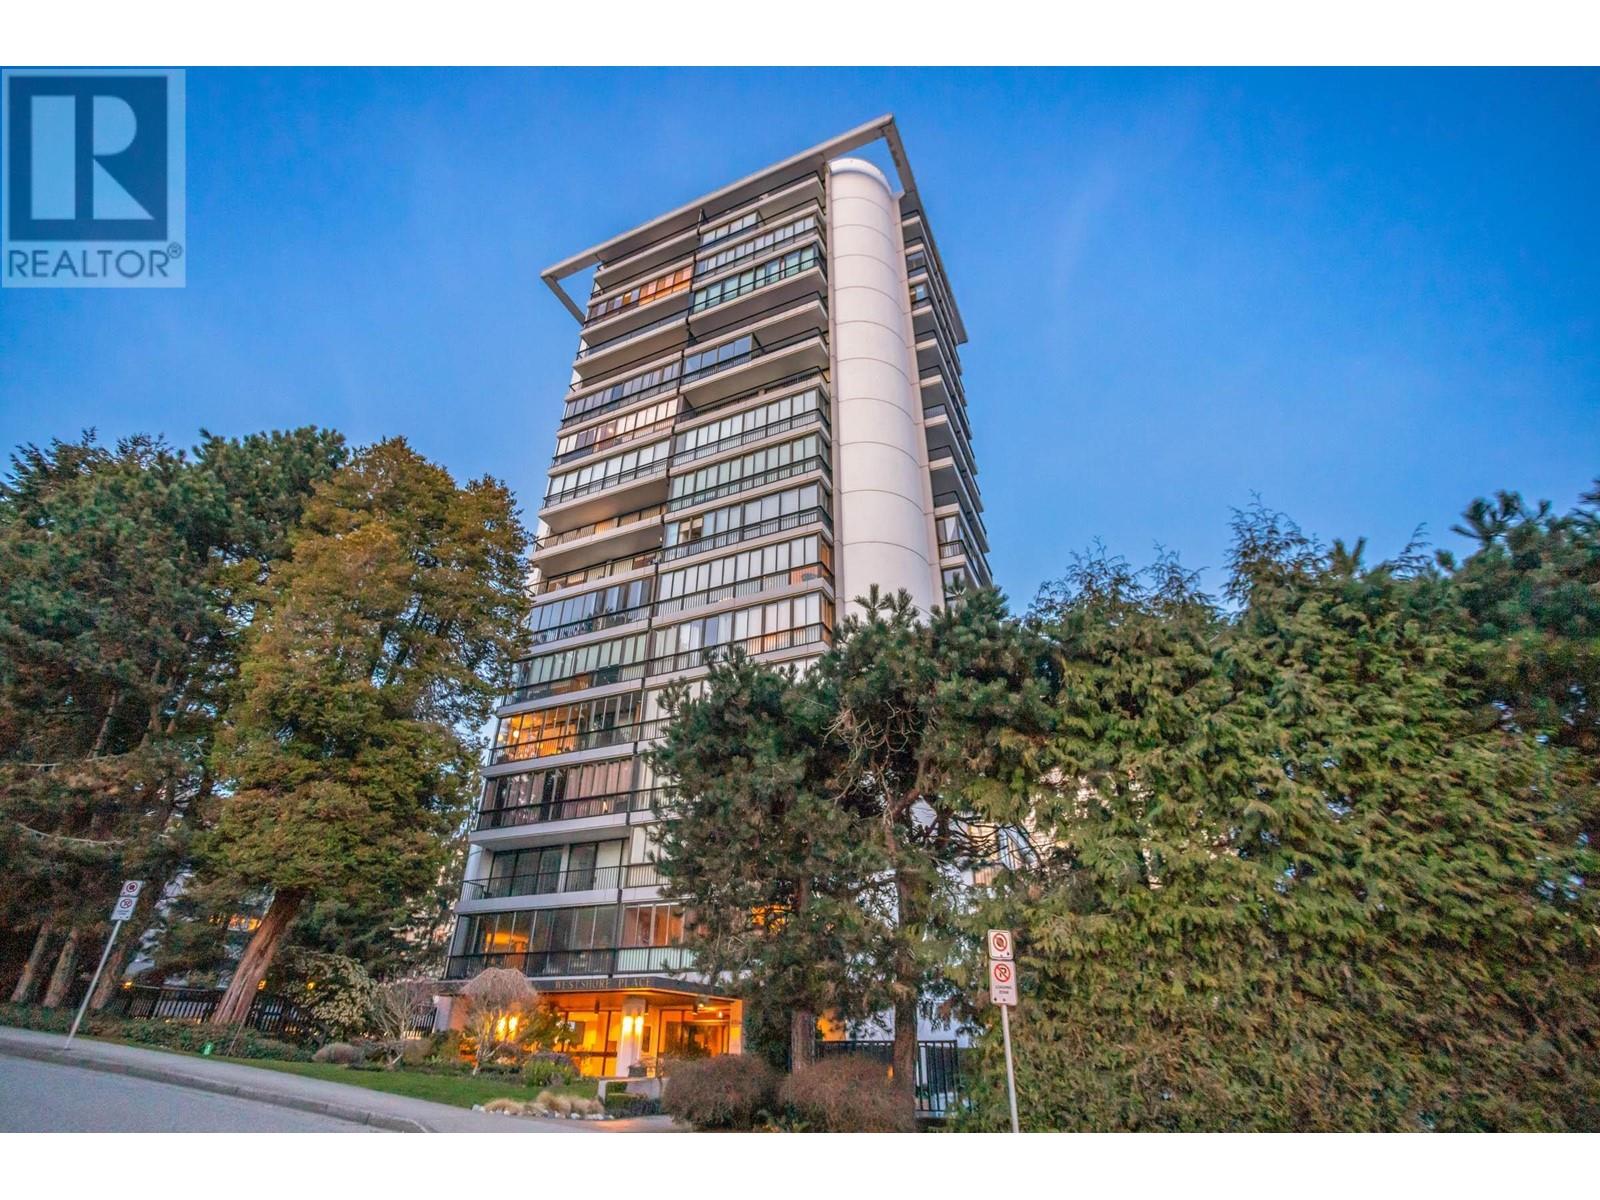 801 650 16TH STREET, west vancouver, British Columbia